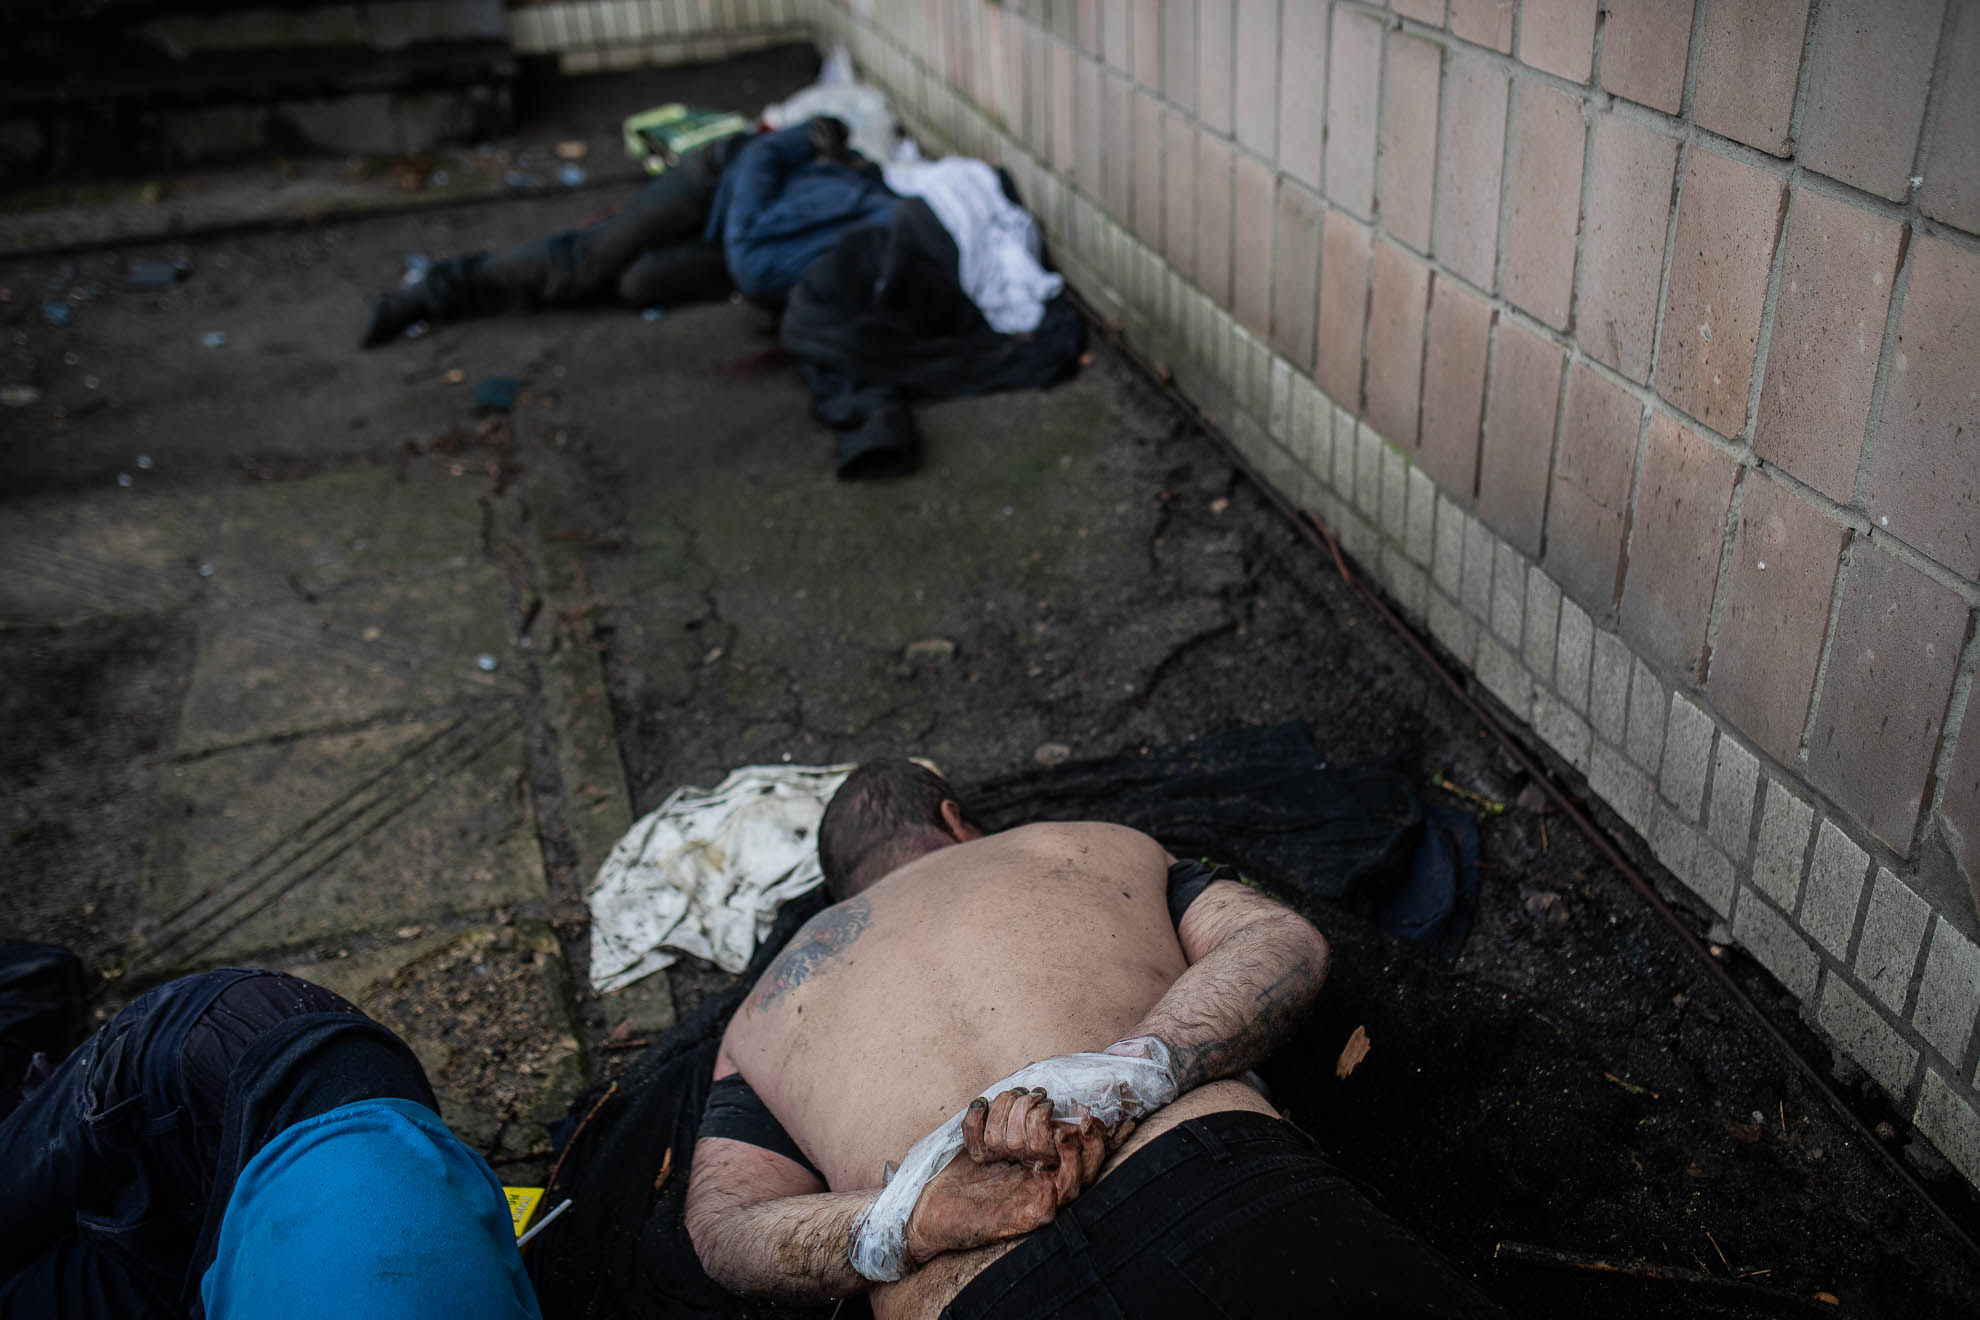 The lifeless body of Andriy, 32, lies with his hands tied behind his back, along with other corpses, in a courtyard of the building that served as headquarters for Russian troops in Bucha. His father, also named Andriy, said that his son had hidden from Russian soldiers in a cellar, but was found and executed on March 5.